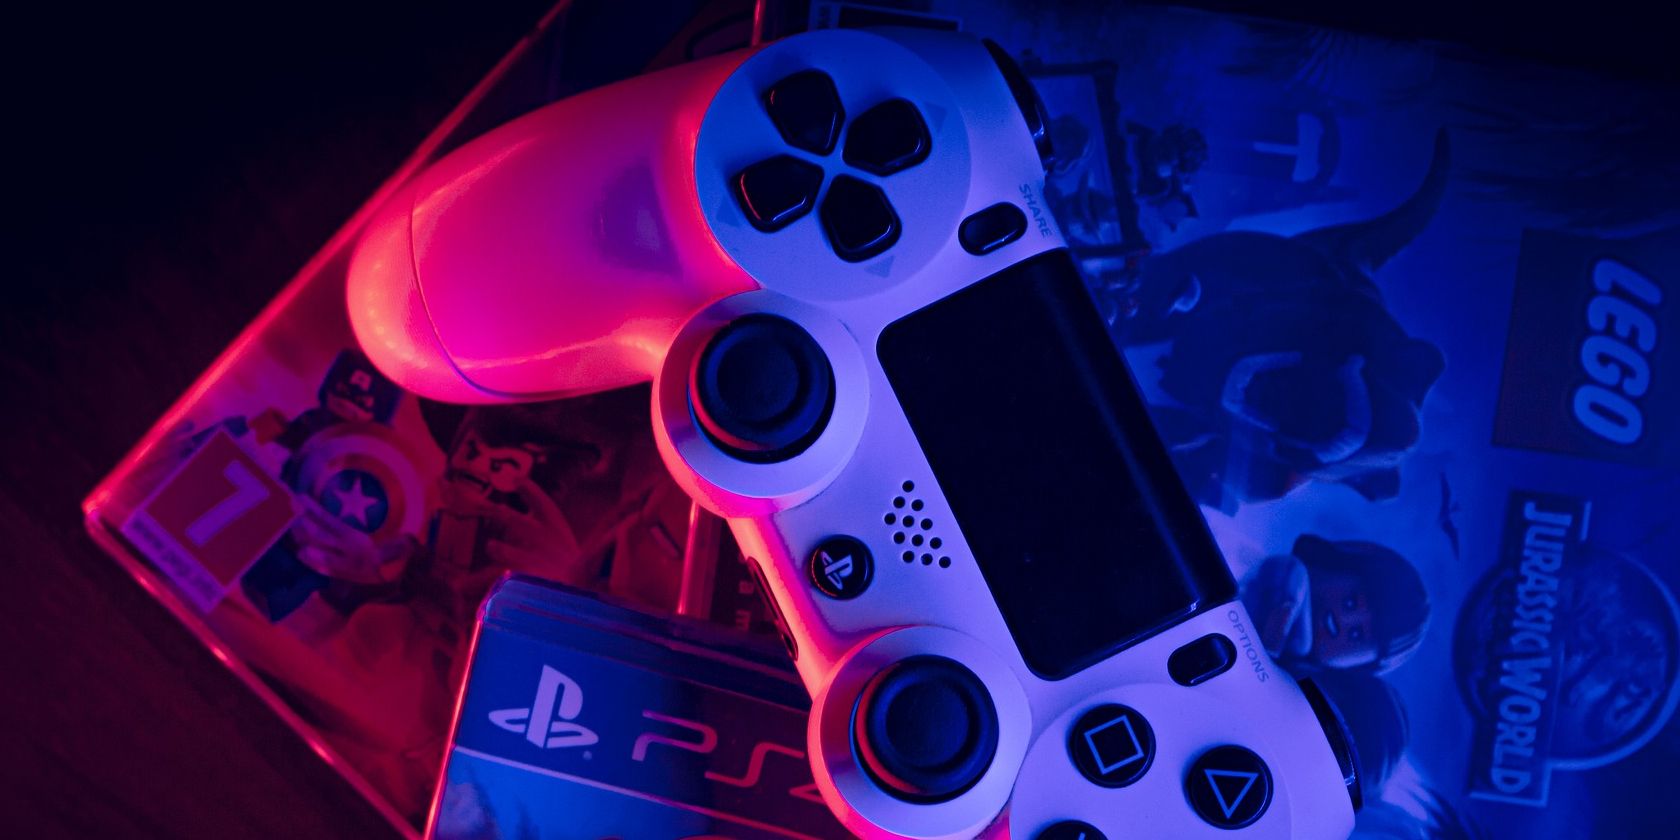 White PlayStation 4 controller on top of PS4 games